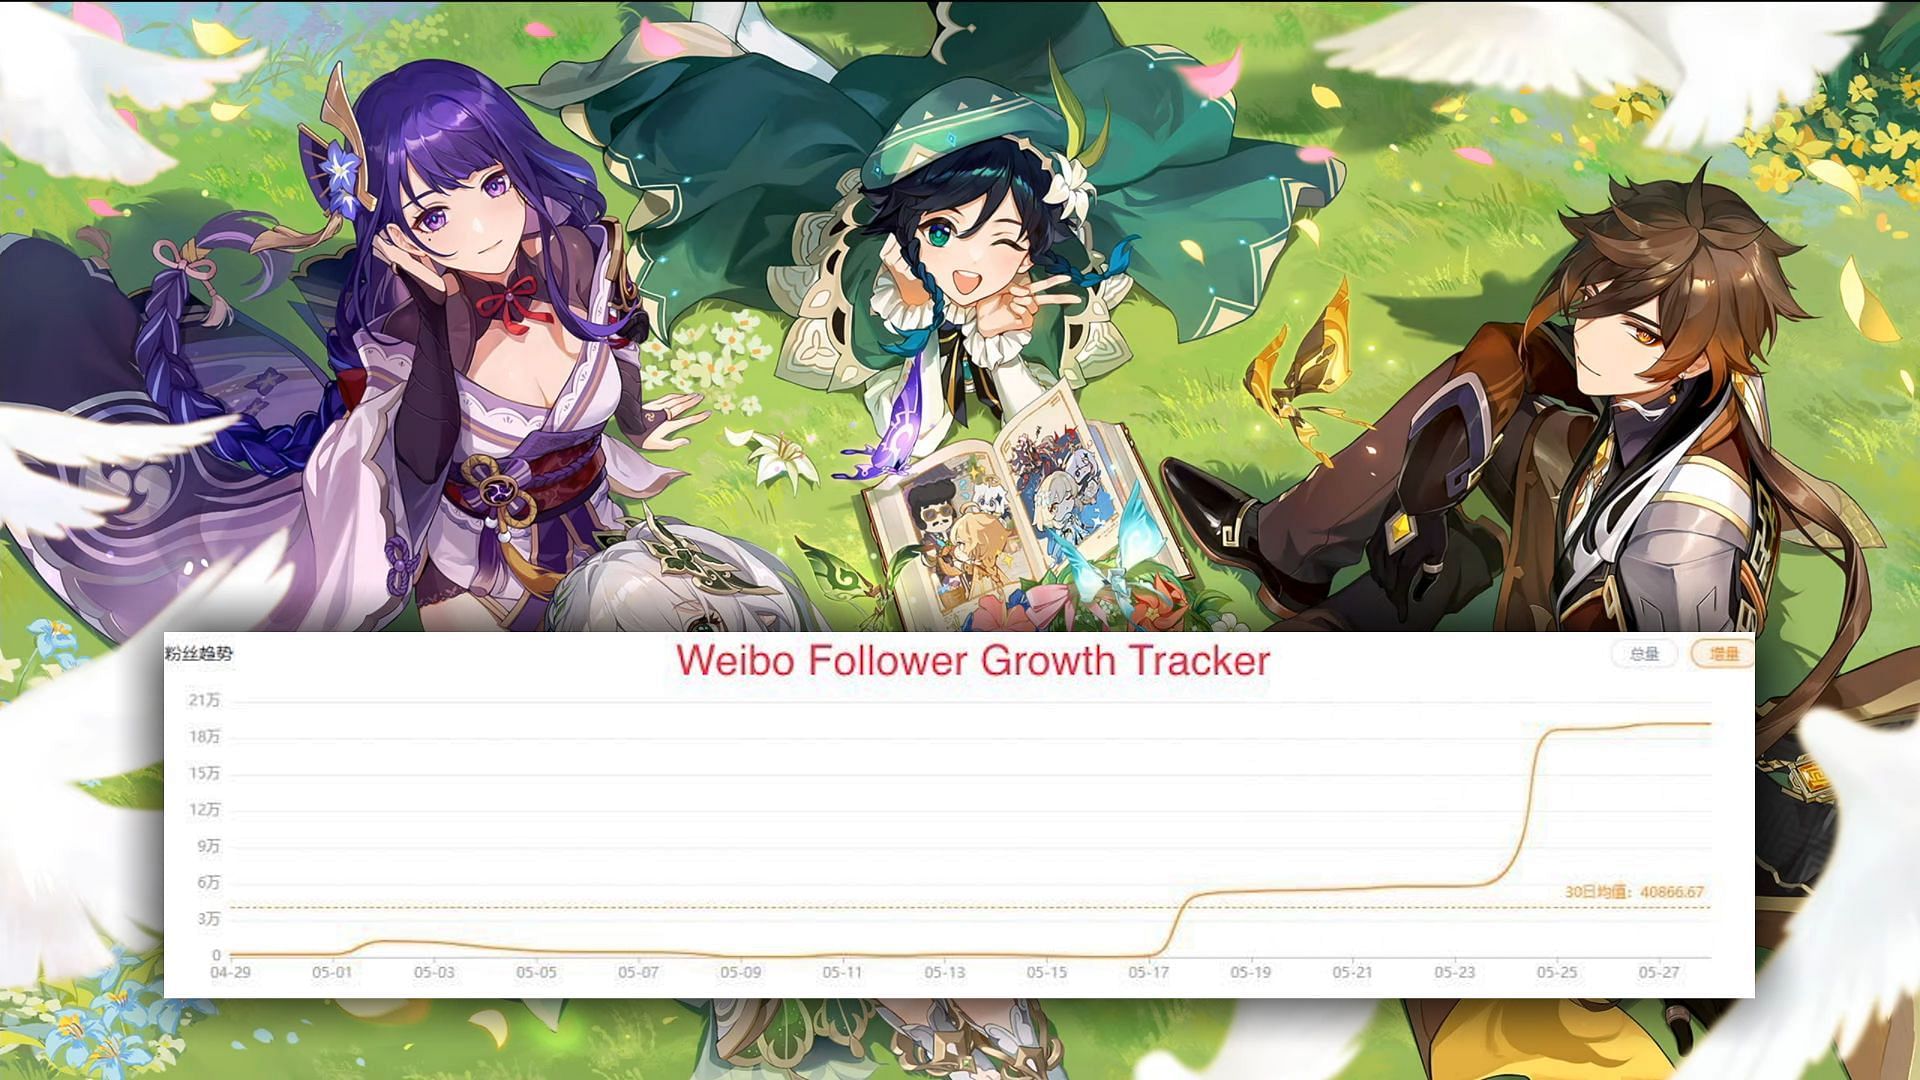 Some new allegations accuse Genshin Impact paying for fake followers on Weibo